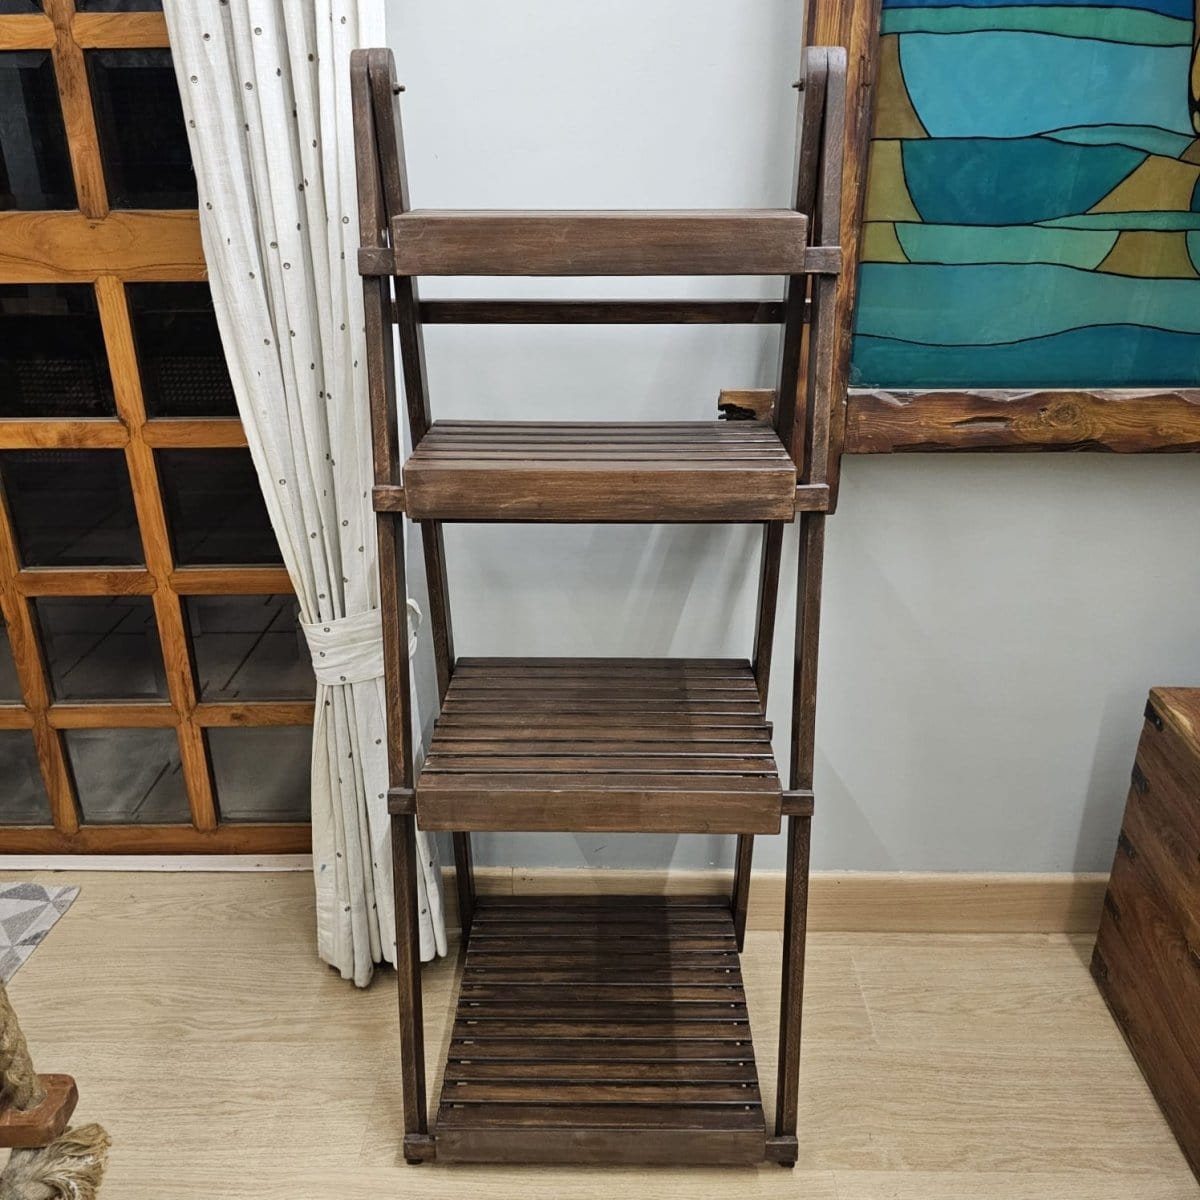 Barish Multi-purpose Floor Standing Stand (Large) Best Home Decor Handcrafted